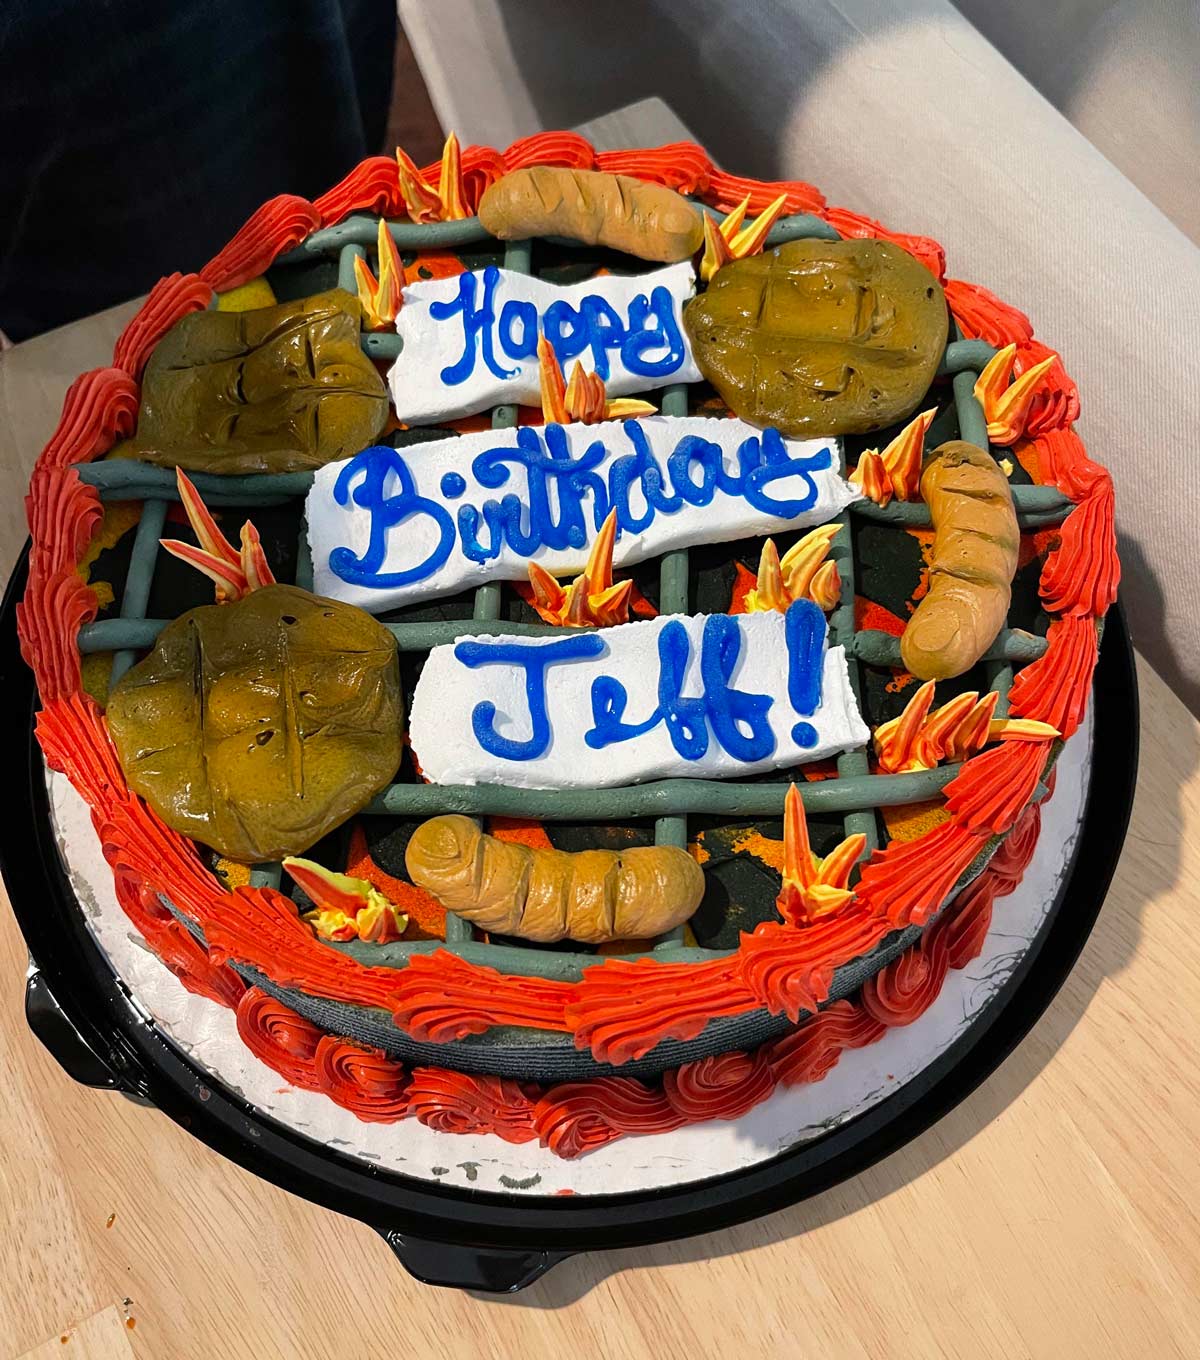 Cake from our local Dairy Queen. Was supposed to be barbecue themed